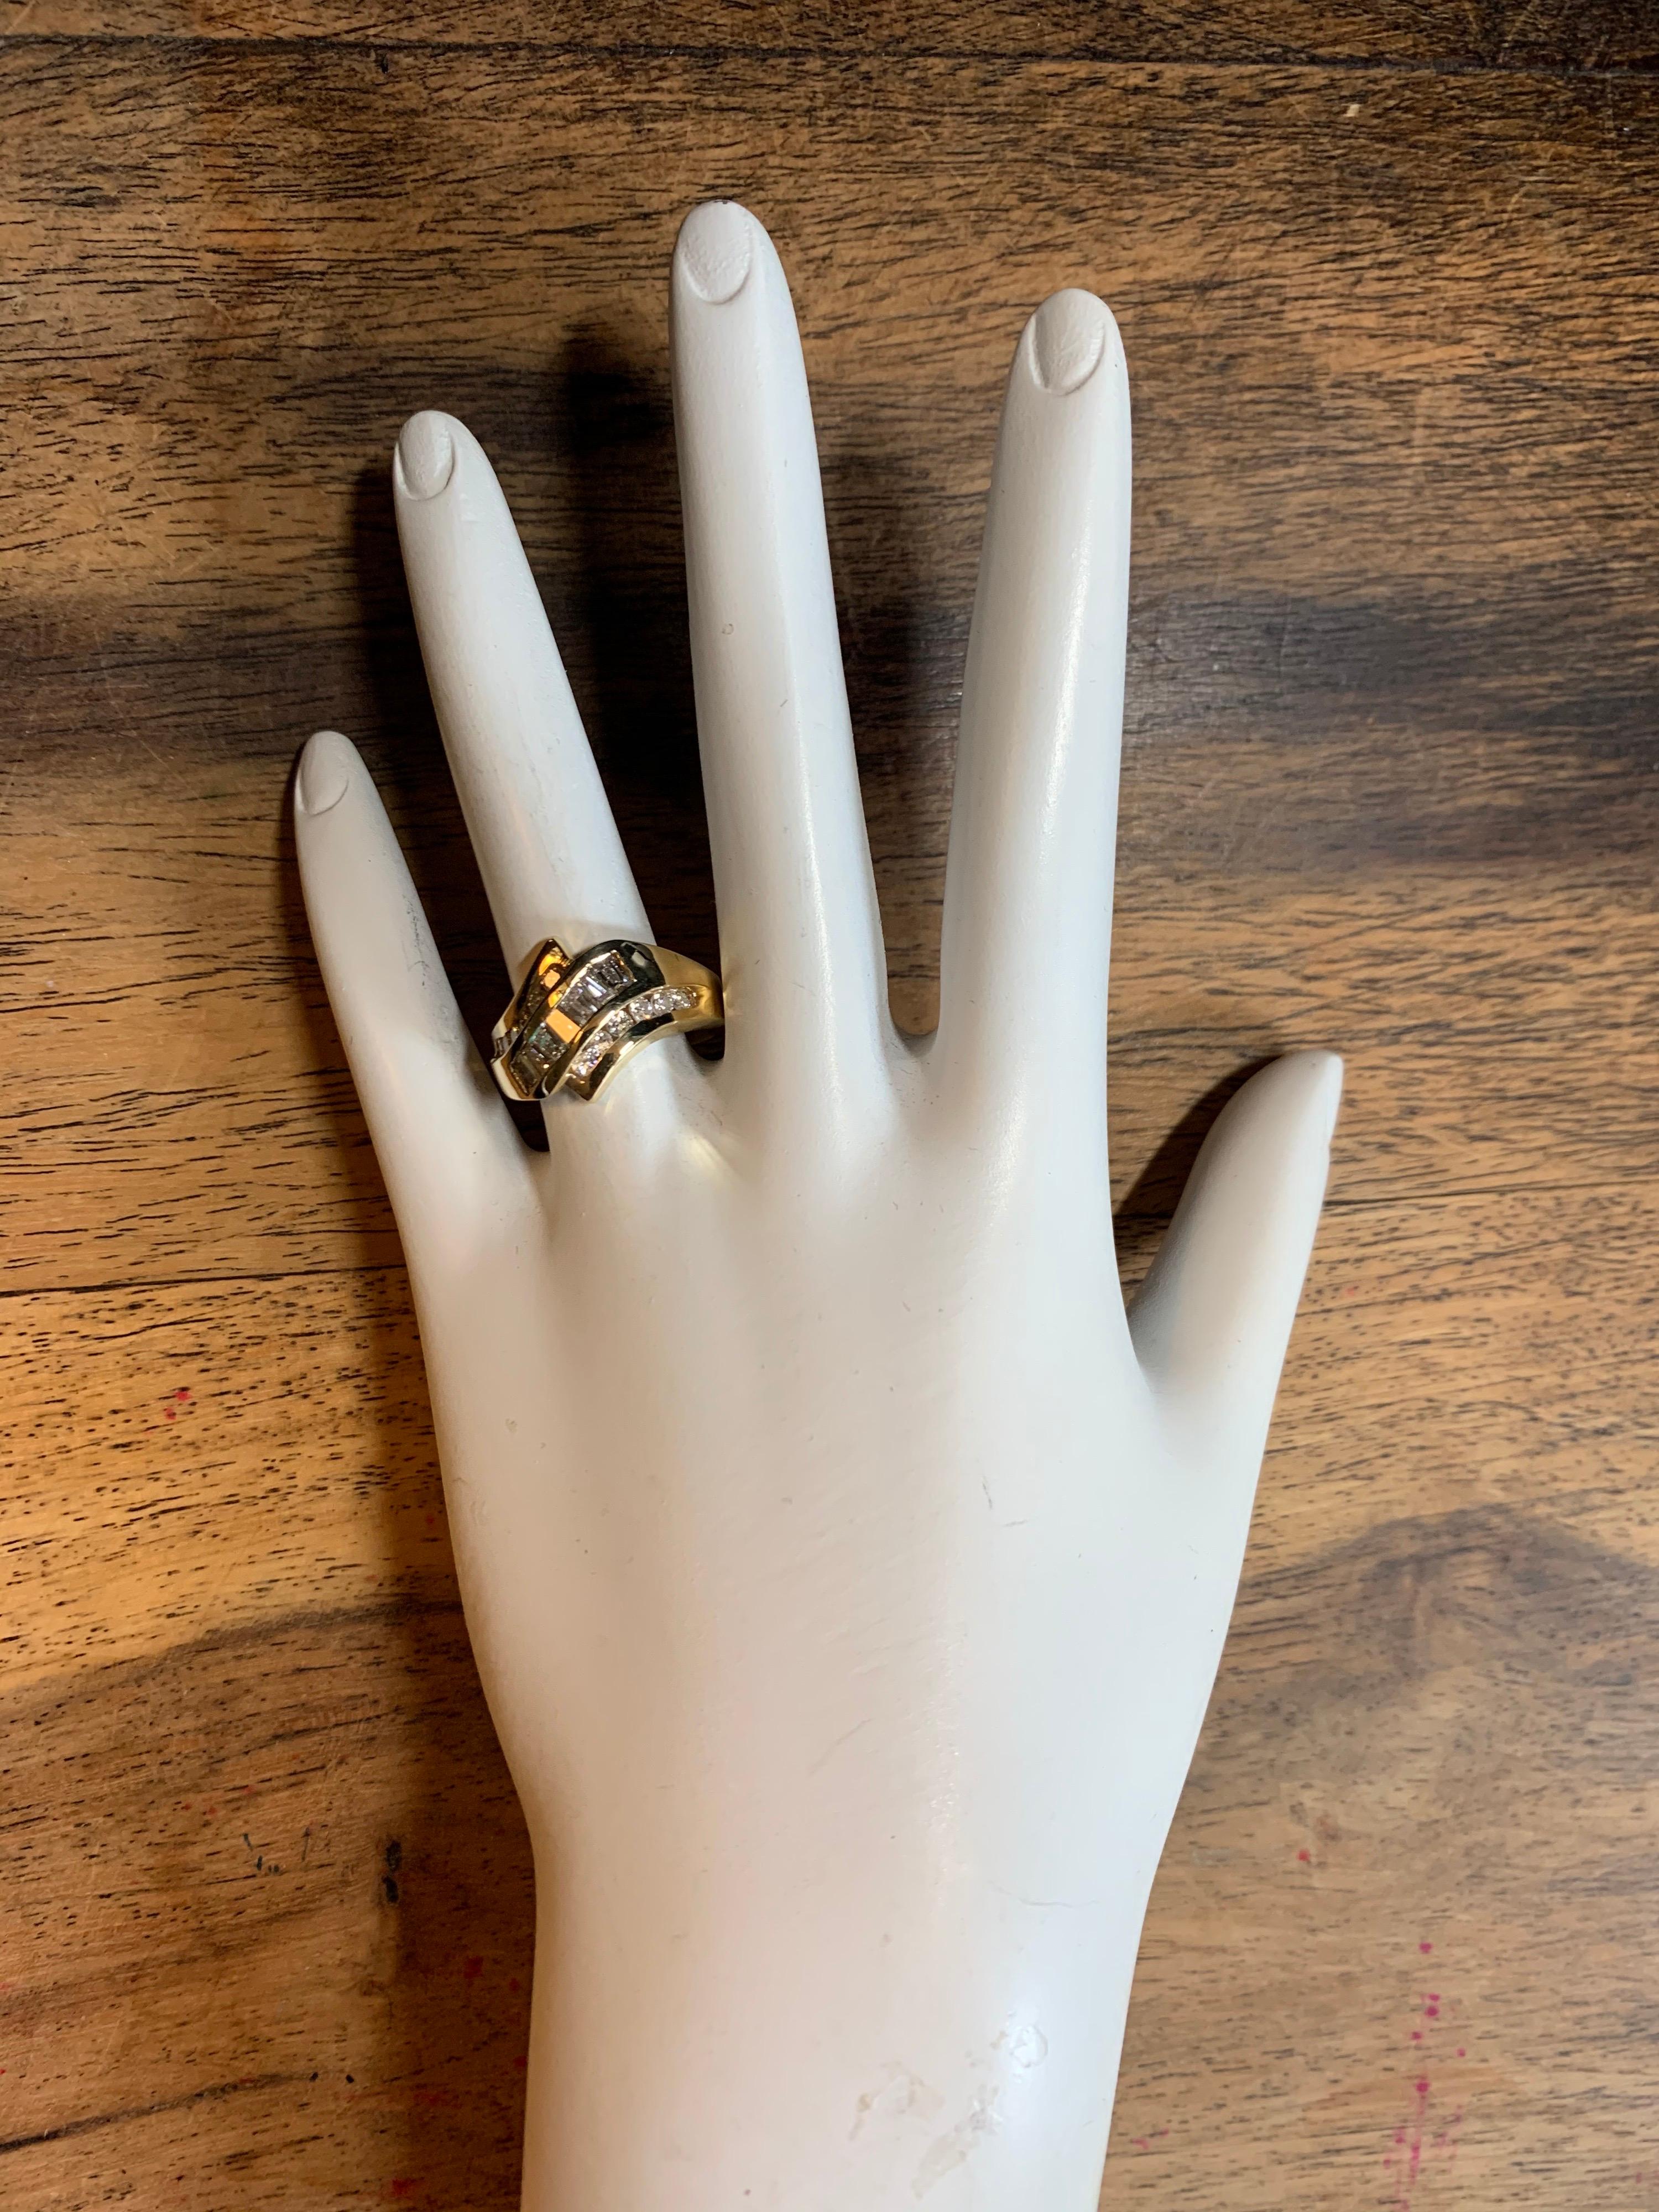 Retro 14k Yellow Gold Cocktail Ring set with approximately 1.25 Carats of Natural 12 Round & 7 Baguette Diamonds. Color is approximately G-I and clarity is VS-I.

The ring weighs 5.5 grams and size is 6.5.

Circa 1960. Condition is Pre-owned. 